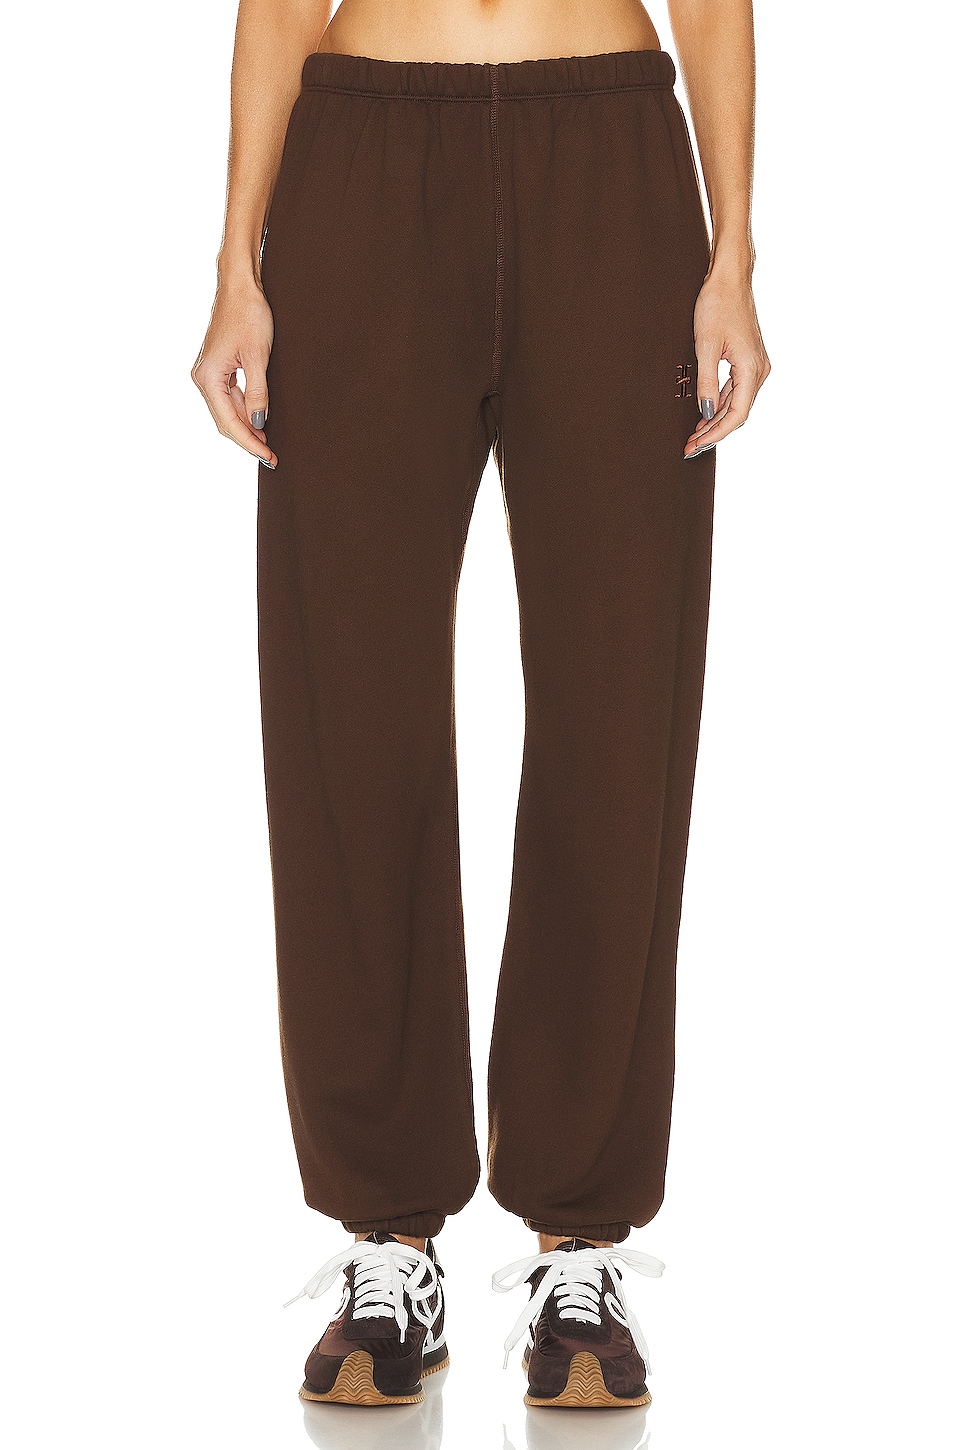 Image 1 of Eterne Classic Sweatpant in Heather Brown